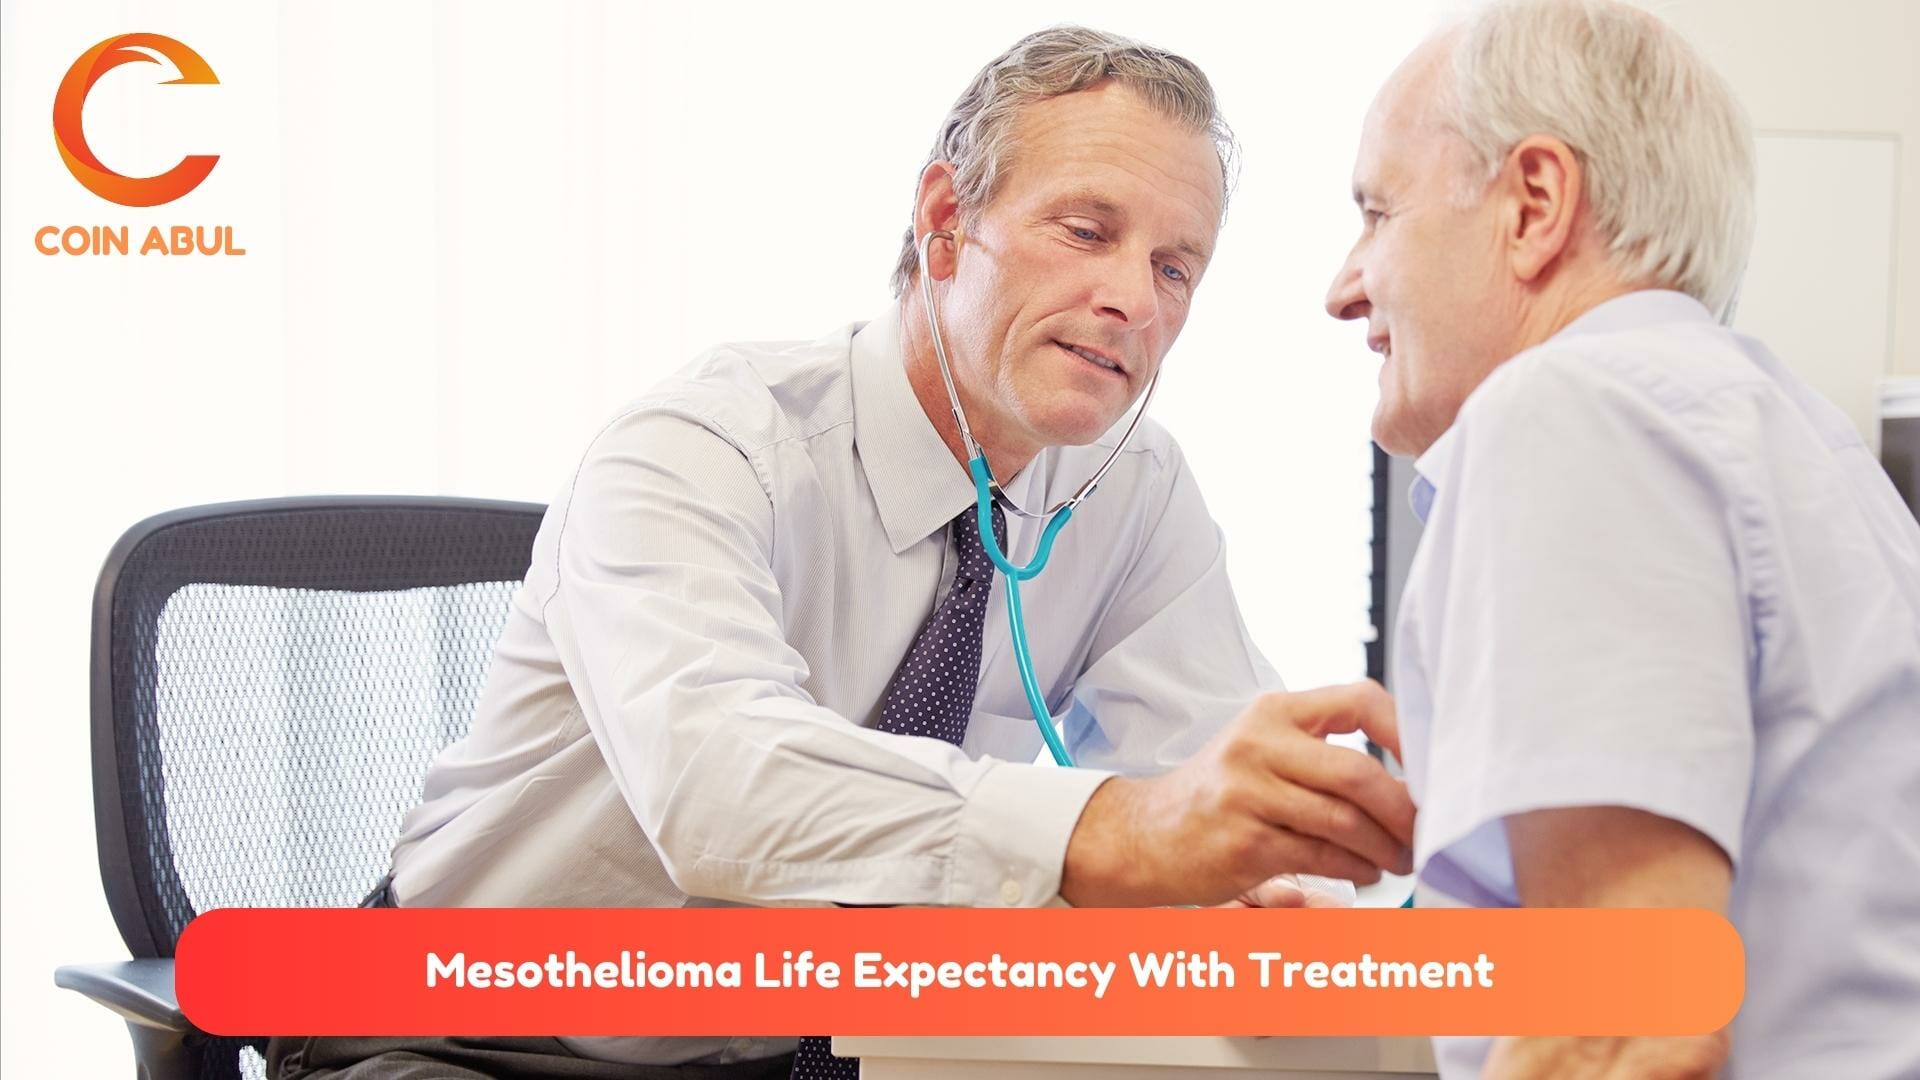 Mesothelioma Life Expectancy With Treatment